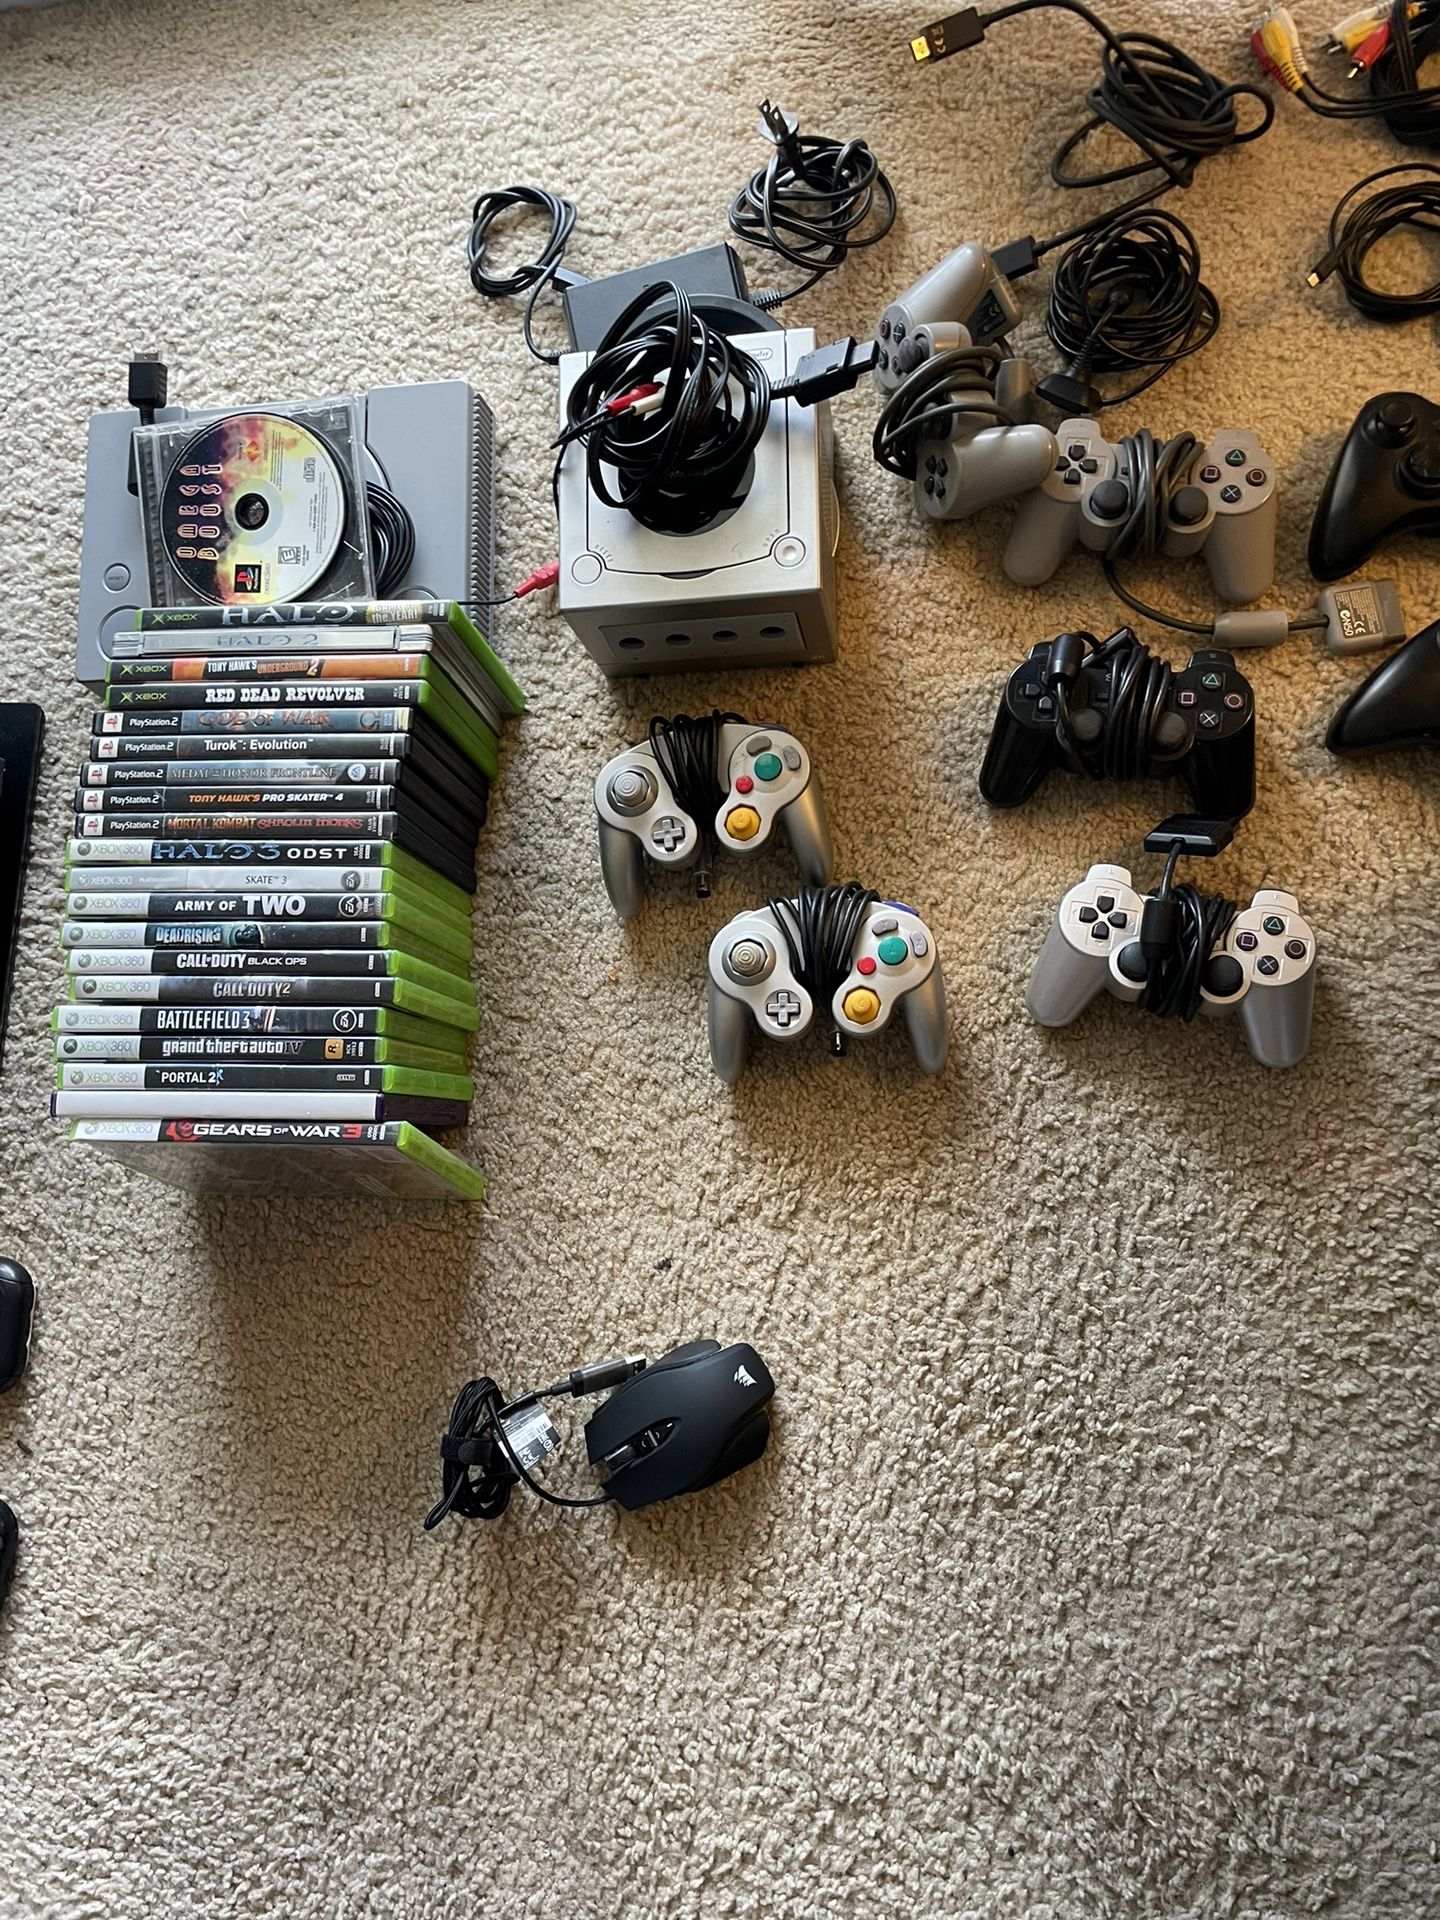 Ps2, Ps1, And GameCube